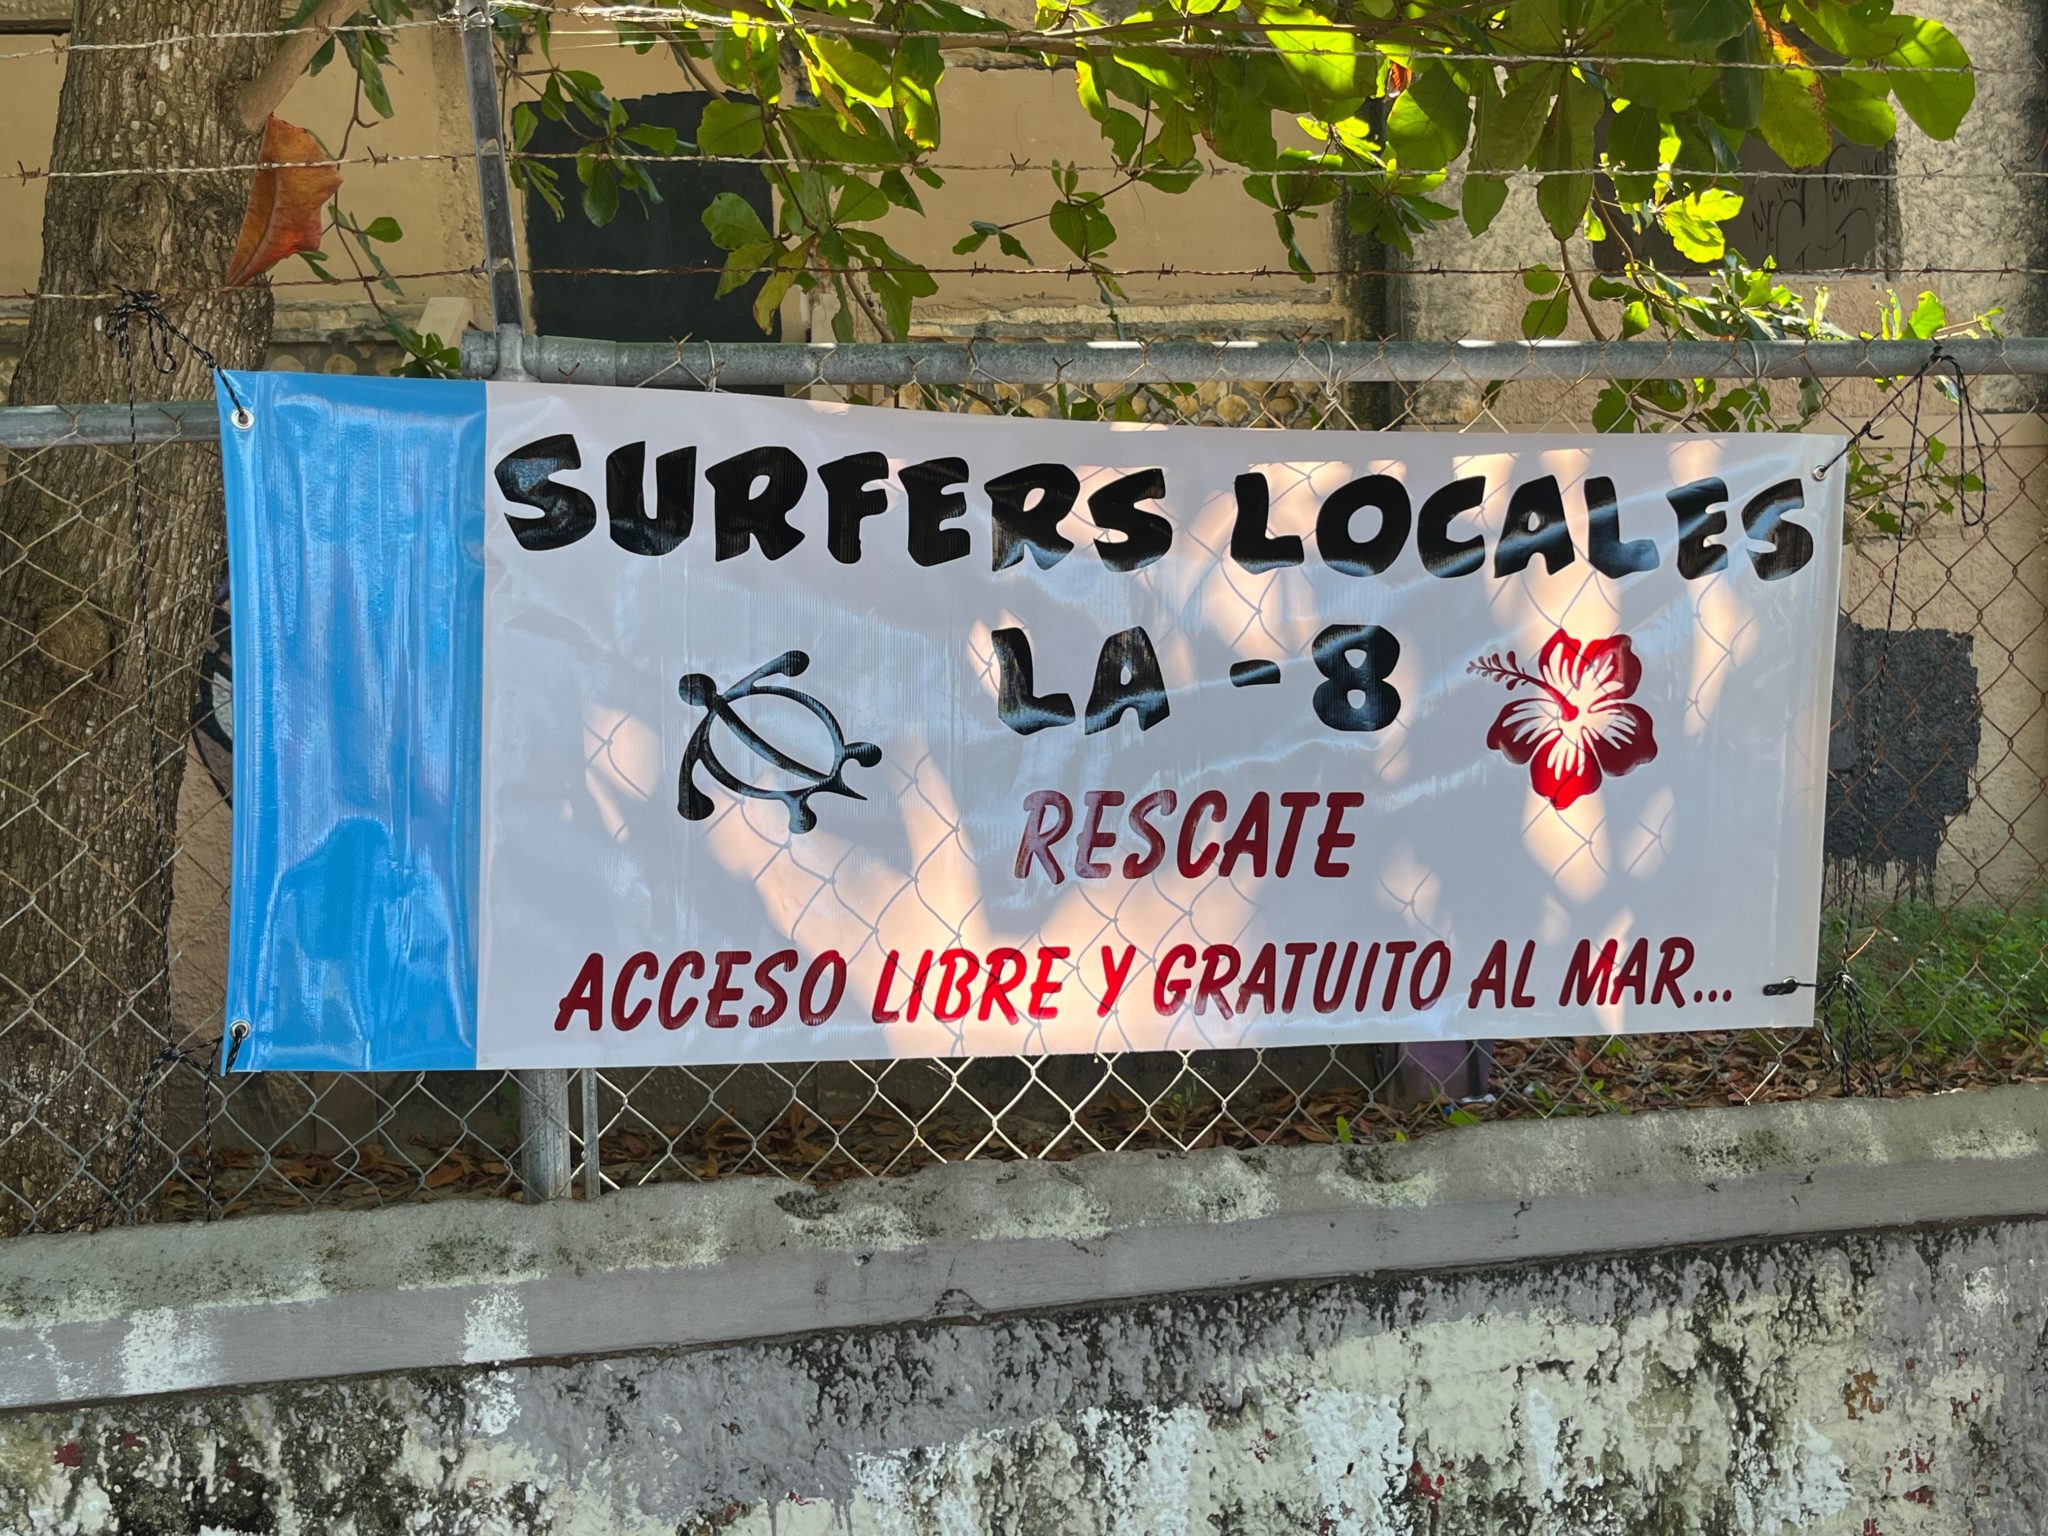 The fight against privatization of beaches in Puerto Rico – Liberation News